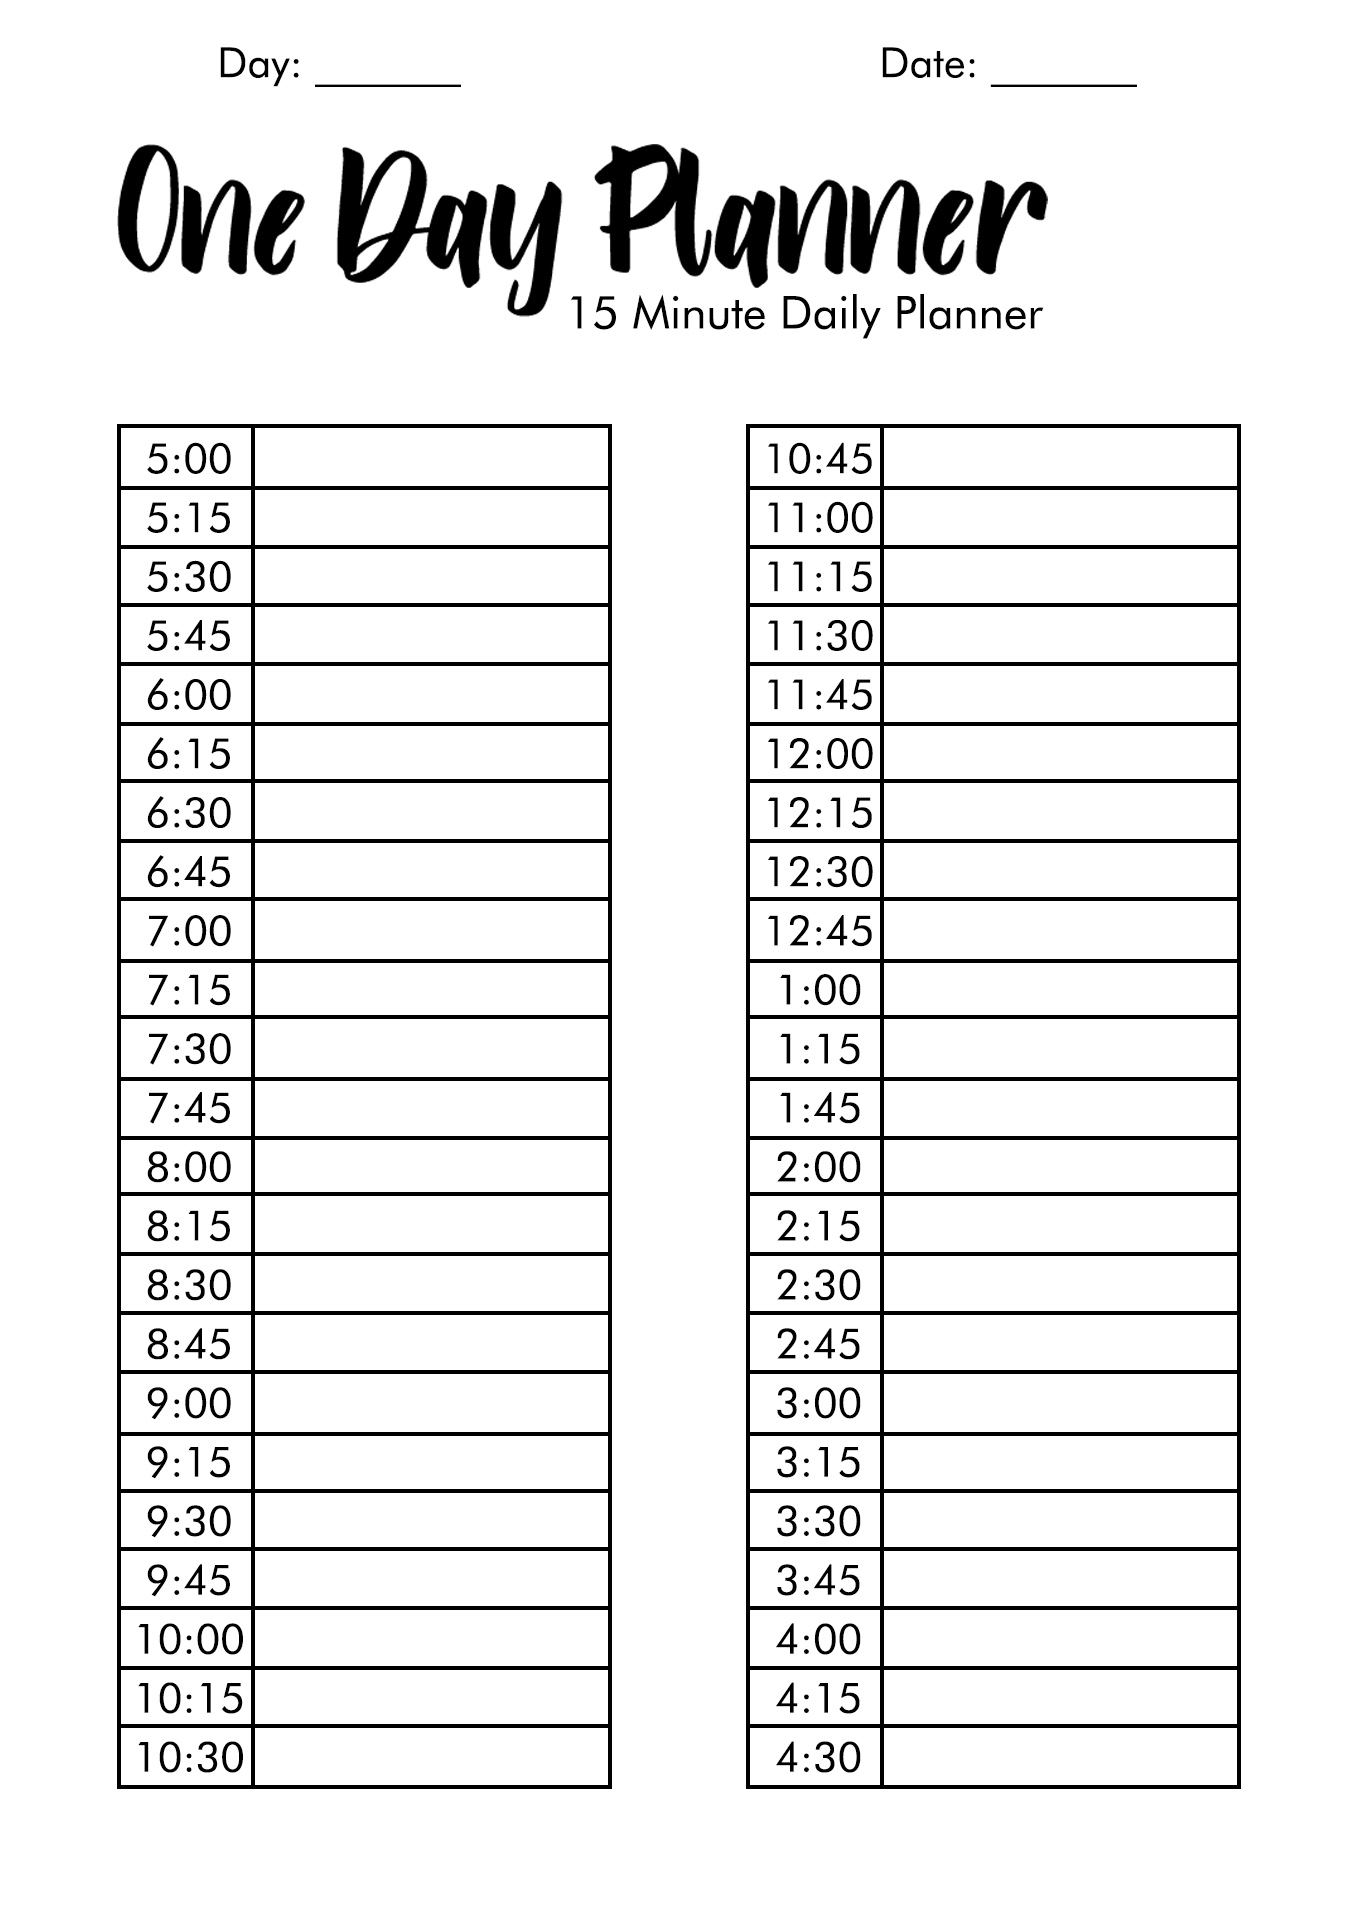 14-best-images-of-time-in-15-minute-increments-worksheet-work-time-log-template-15-minute